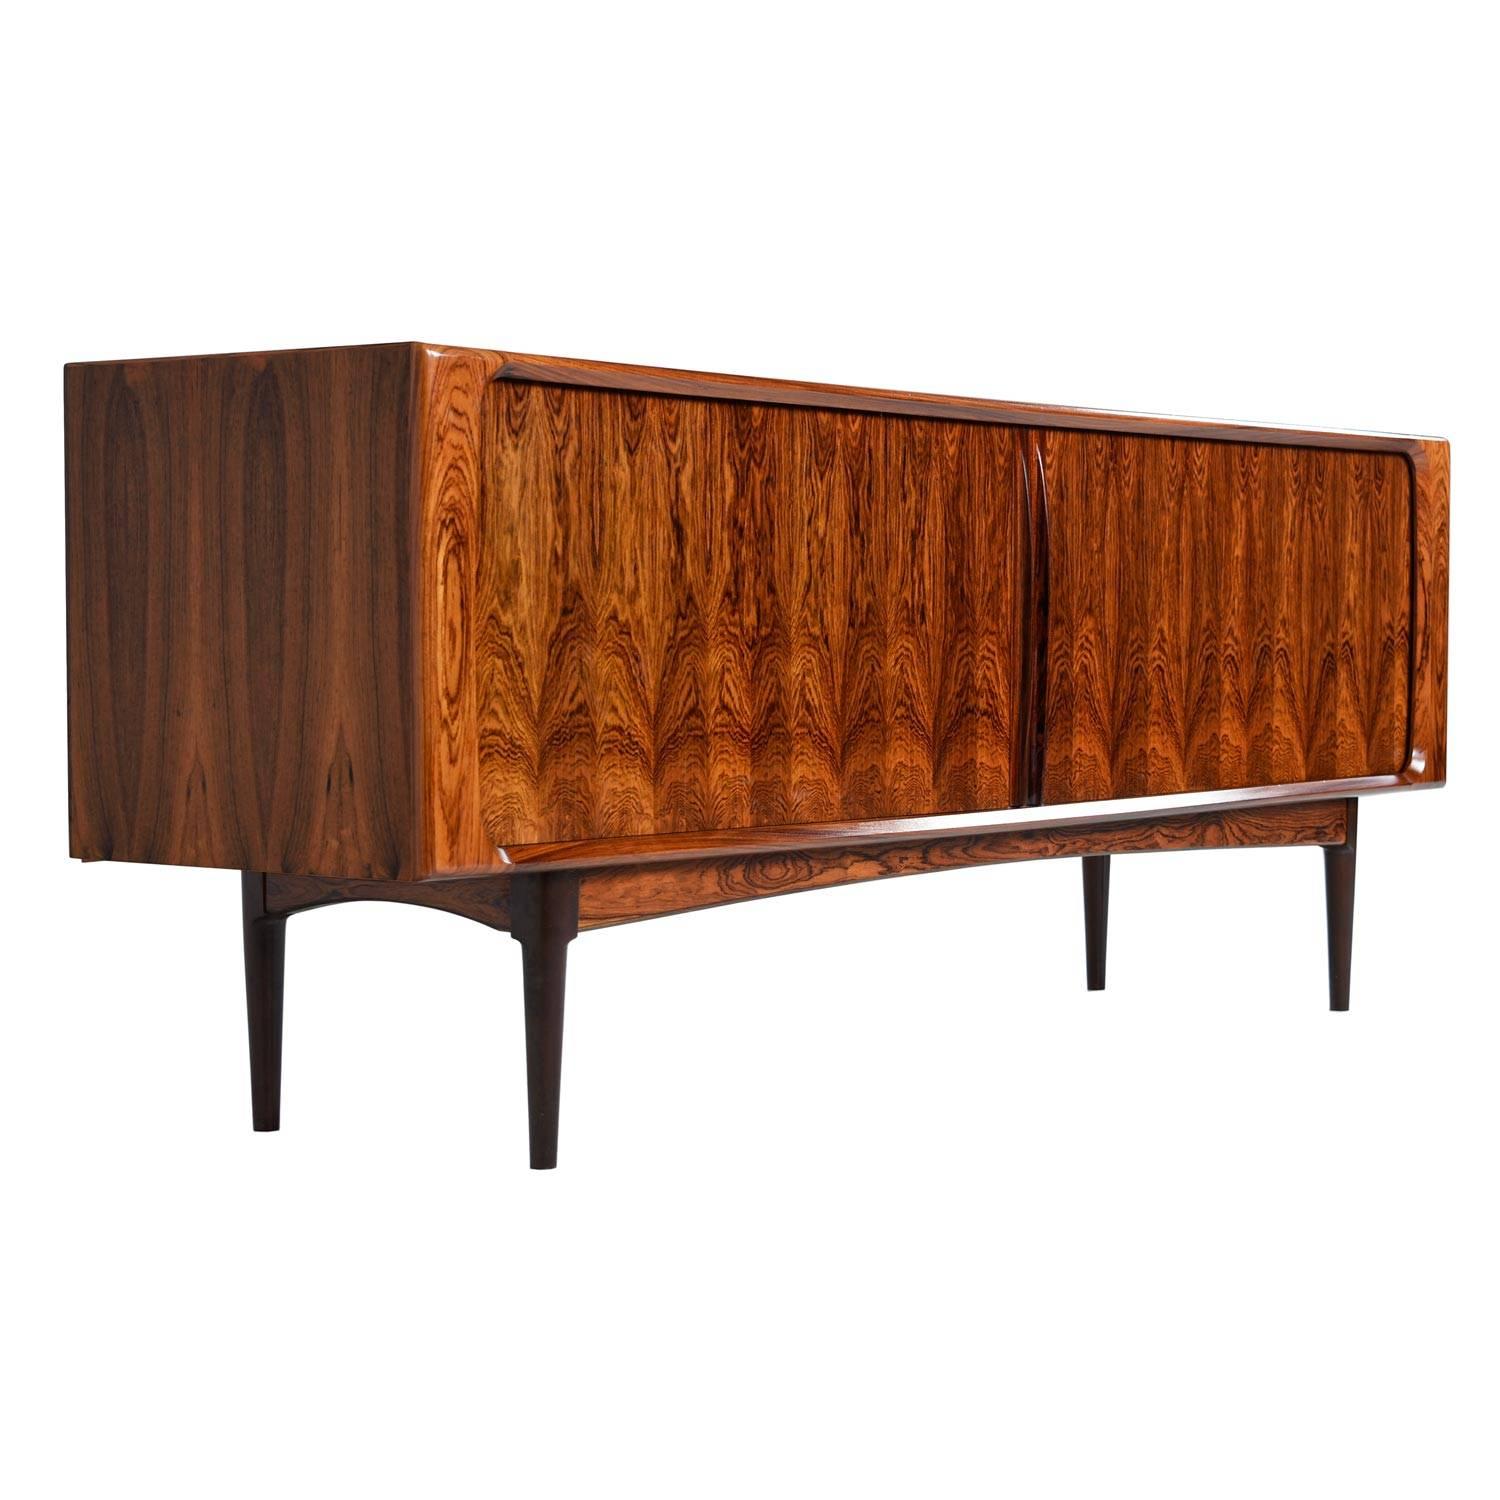 Near mint condition, long Mid-Century Modern Danish teak credenza by Bernhard Pedersen. The natural beauty of the rosewood pattern on the tambour doors is something we rarely see in the caliber. It's truly stunning. 

Expertly crafted with sleek